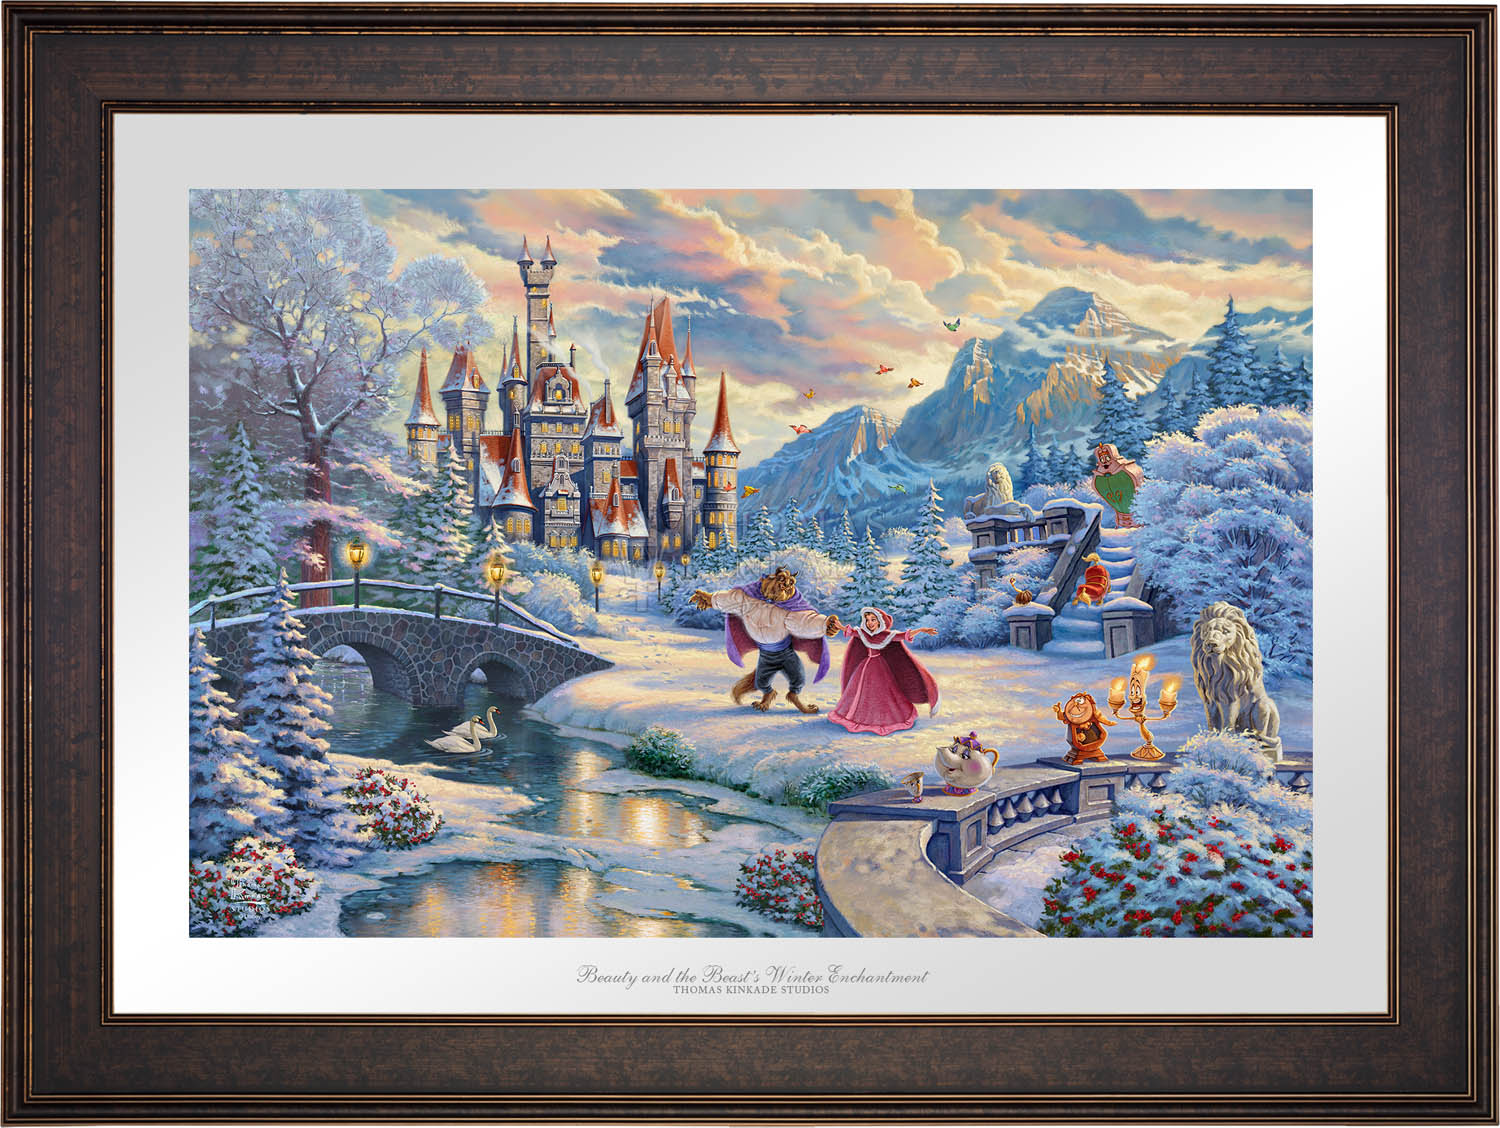 While the two dance in the crisp winter snow, Mrs. Potts, Chip, Cogsworth, Lumiére, Plumette, Frou-Frou, and Madame de Garderobe celebrate this new young love- Gallery Bronze Frame